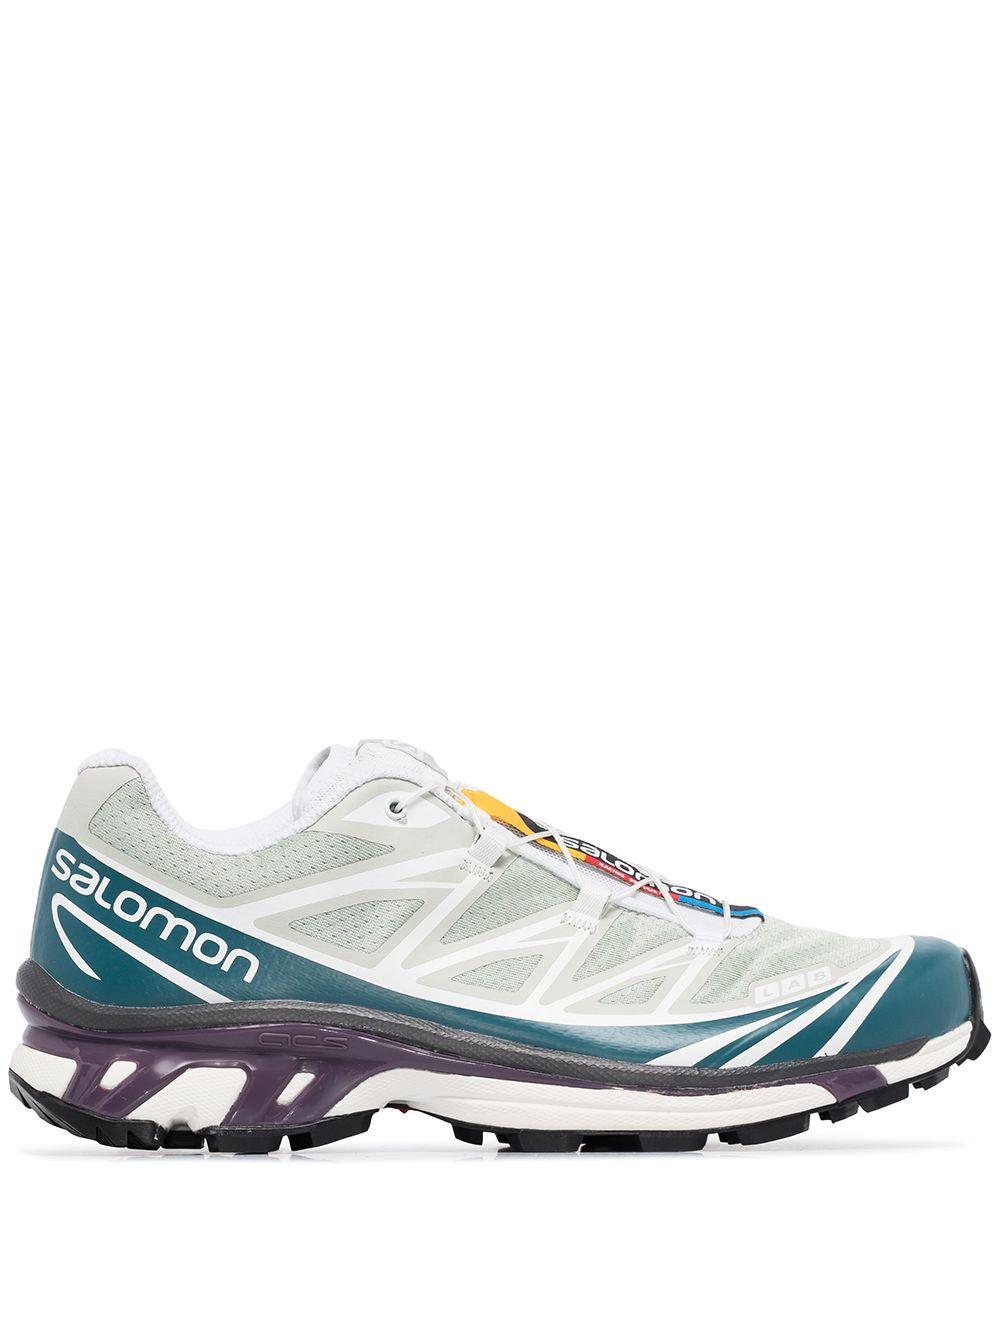 Salomon Lab Grey And Blue Xt-6 Advanced Sneakers in Green | Lyst